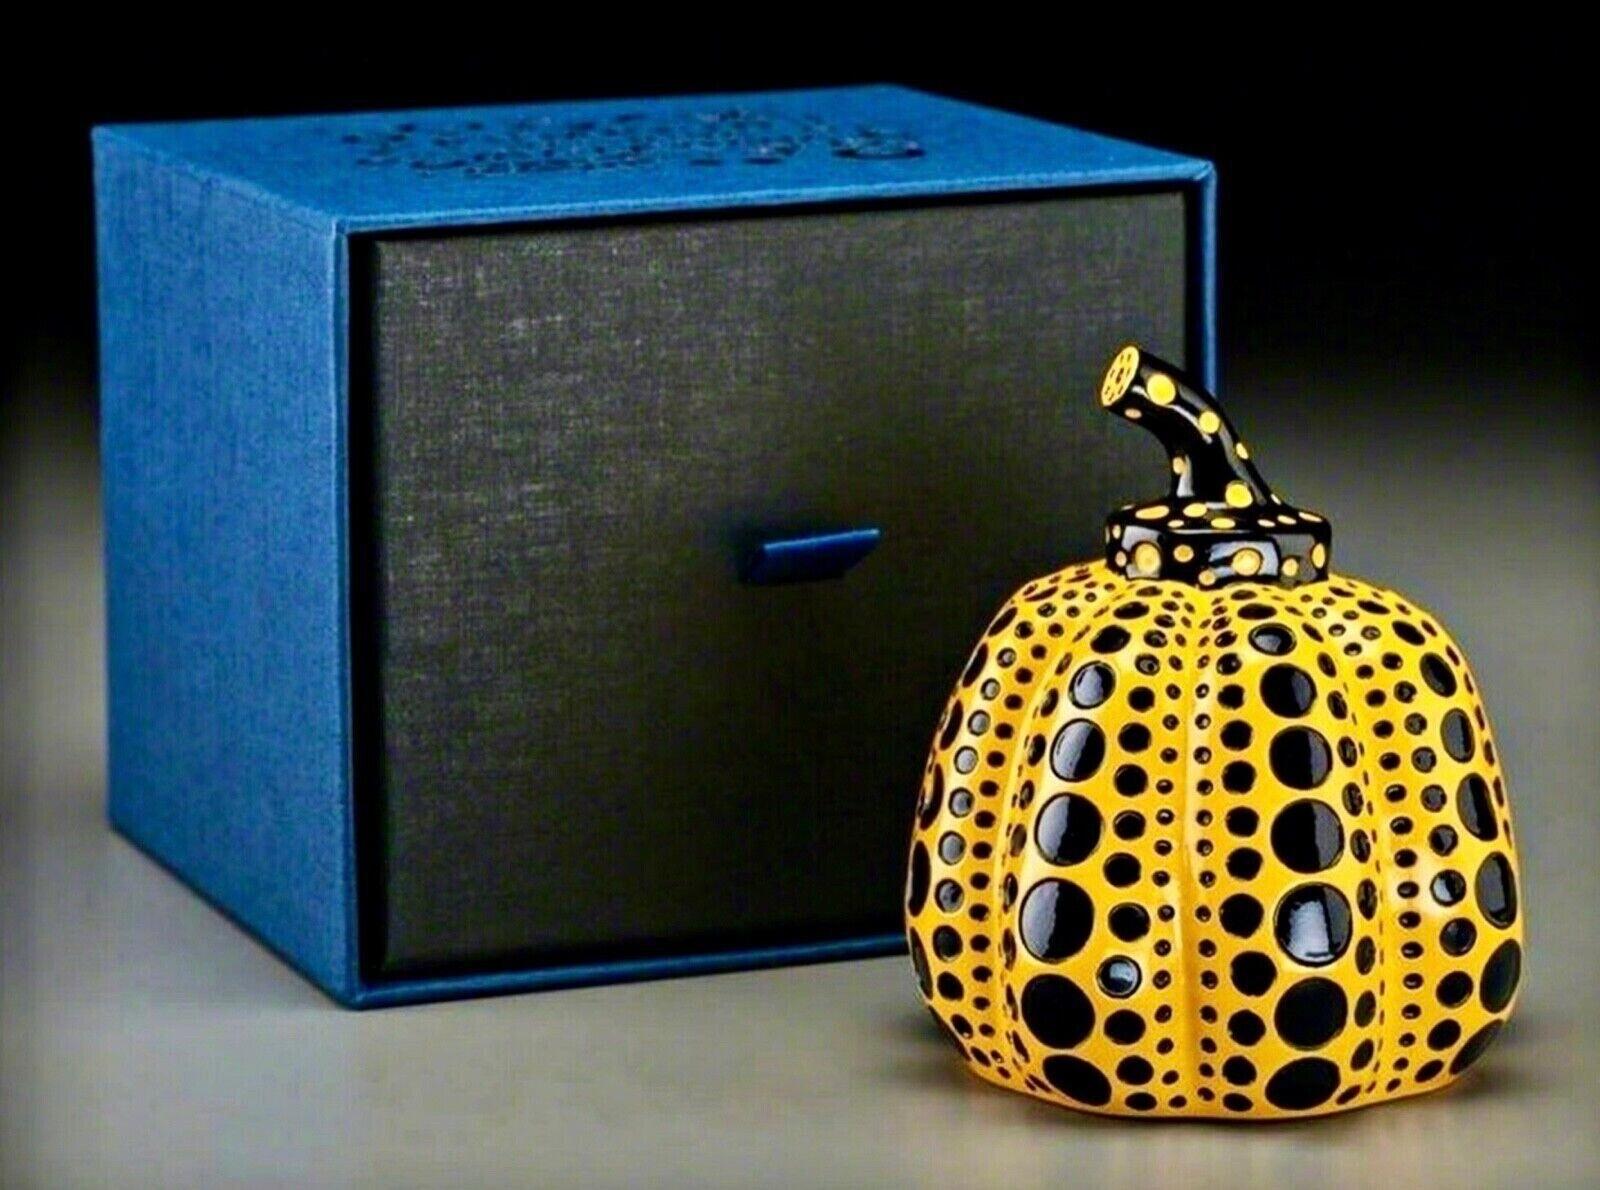 Pumpkin (Yellow & Black)  - Abstract Expressionist Sculpture by Yayoi Kusama